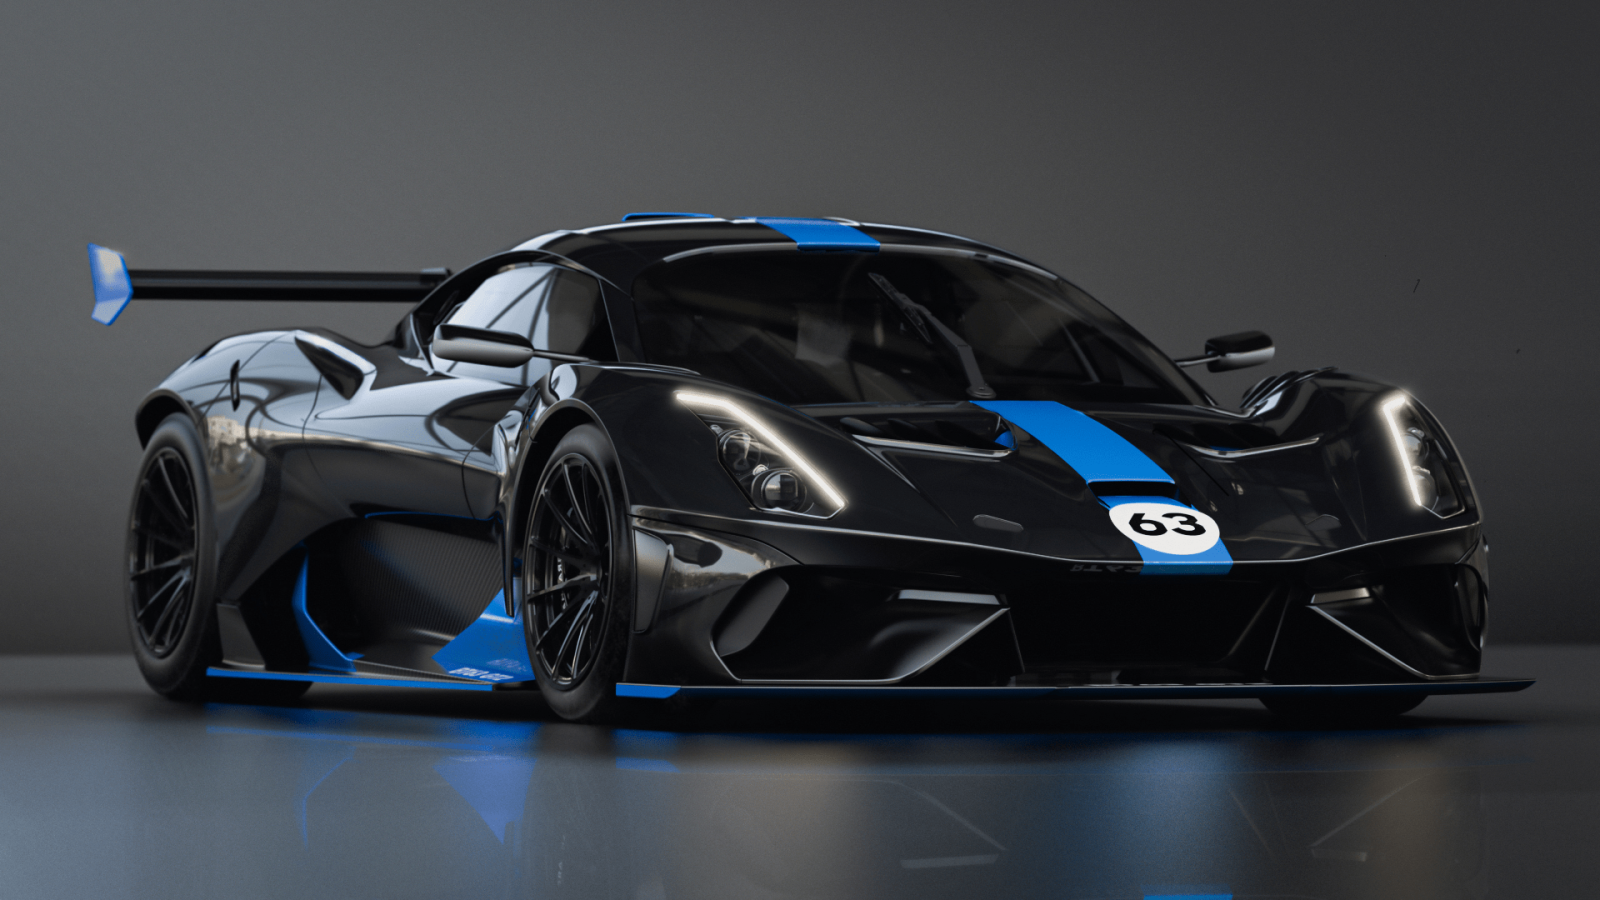 Brabham Automotive to compete in Fanatec GT2 European Series with new BT63 GT2 concept